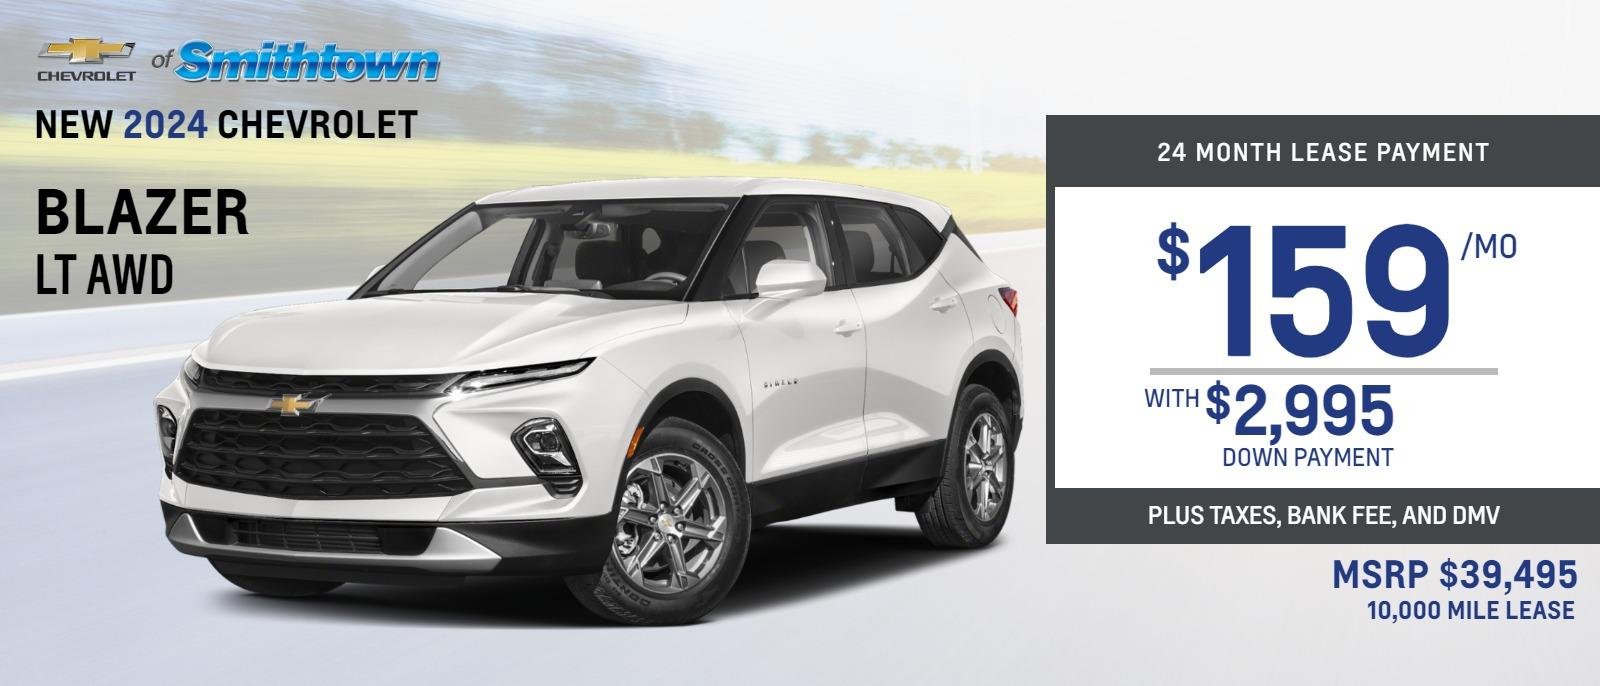 2024 Chevrolet Blazer AWD LT
MSRP $39,495.
24 months
10k
$159. month
$2,995. down, taxes, bank fee and DMV